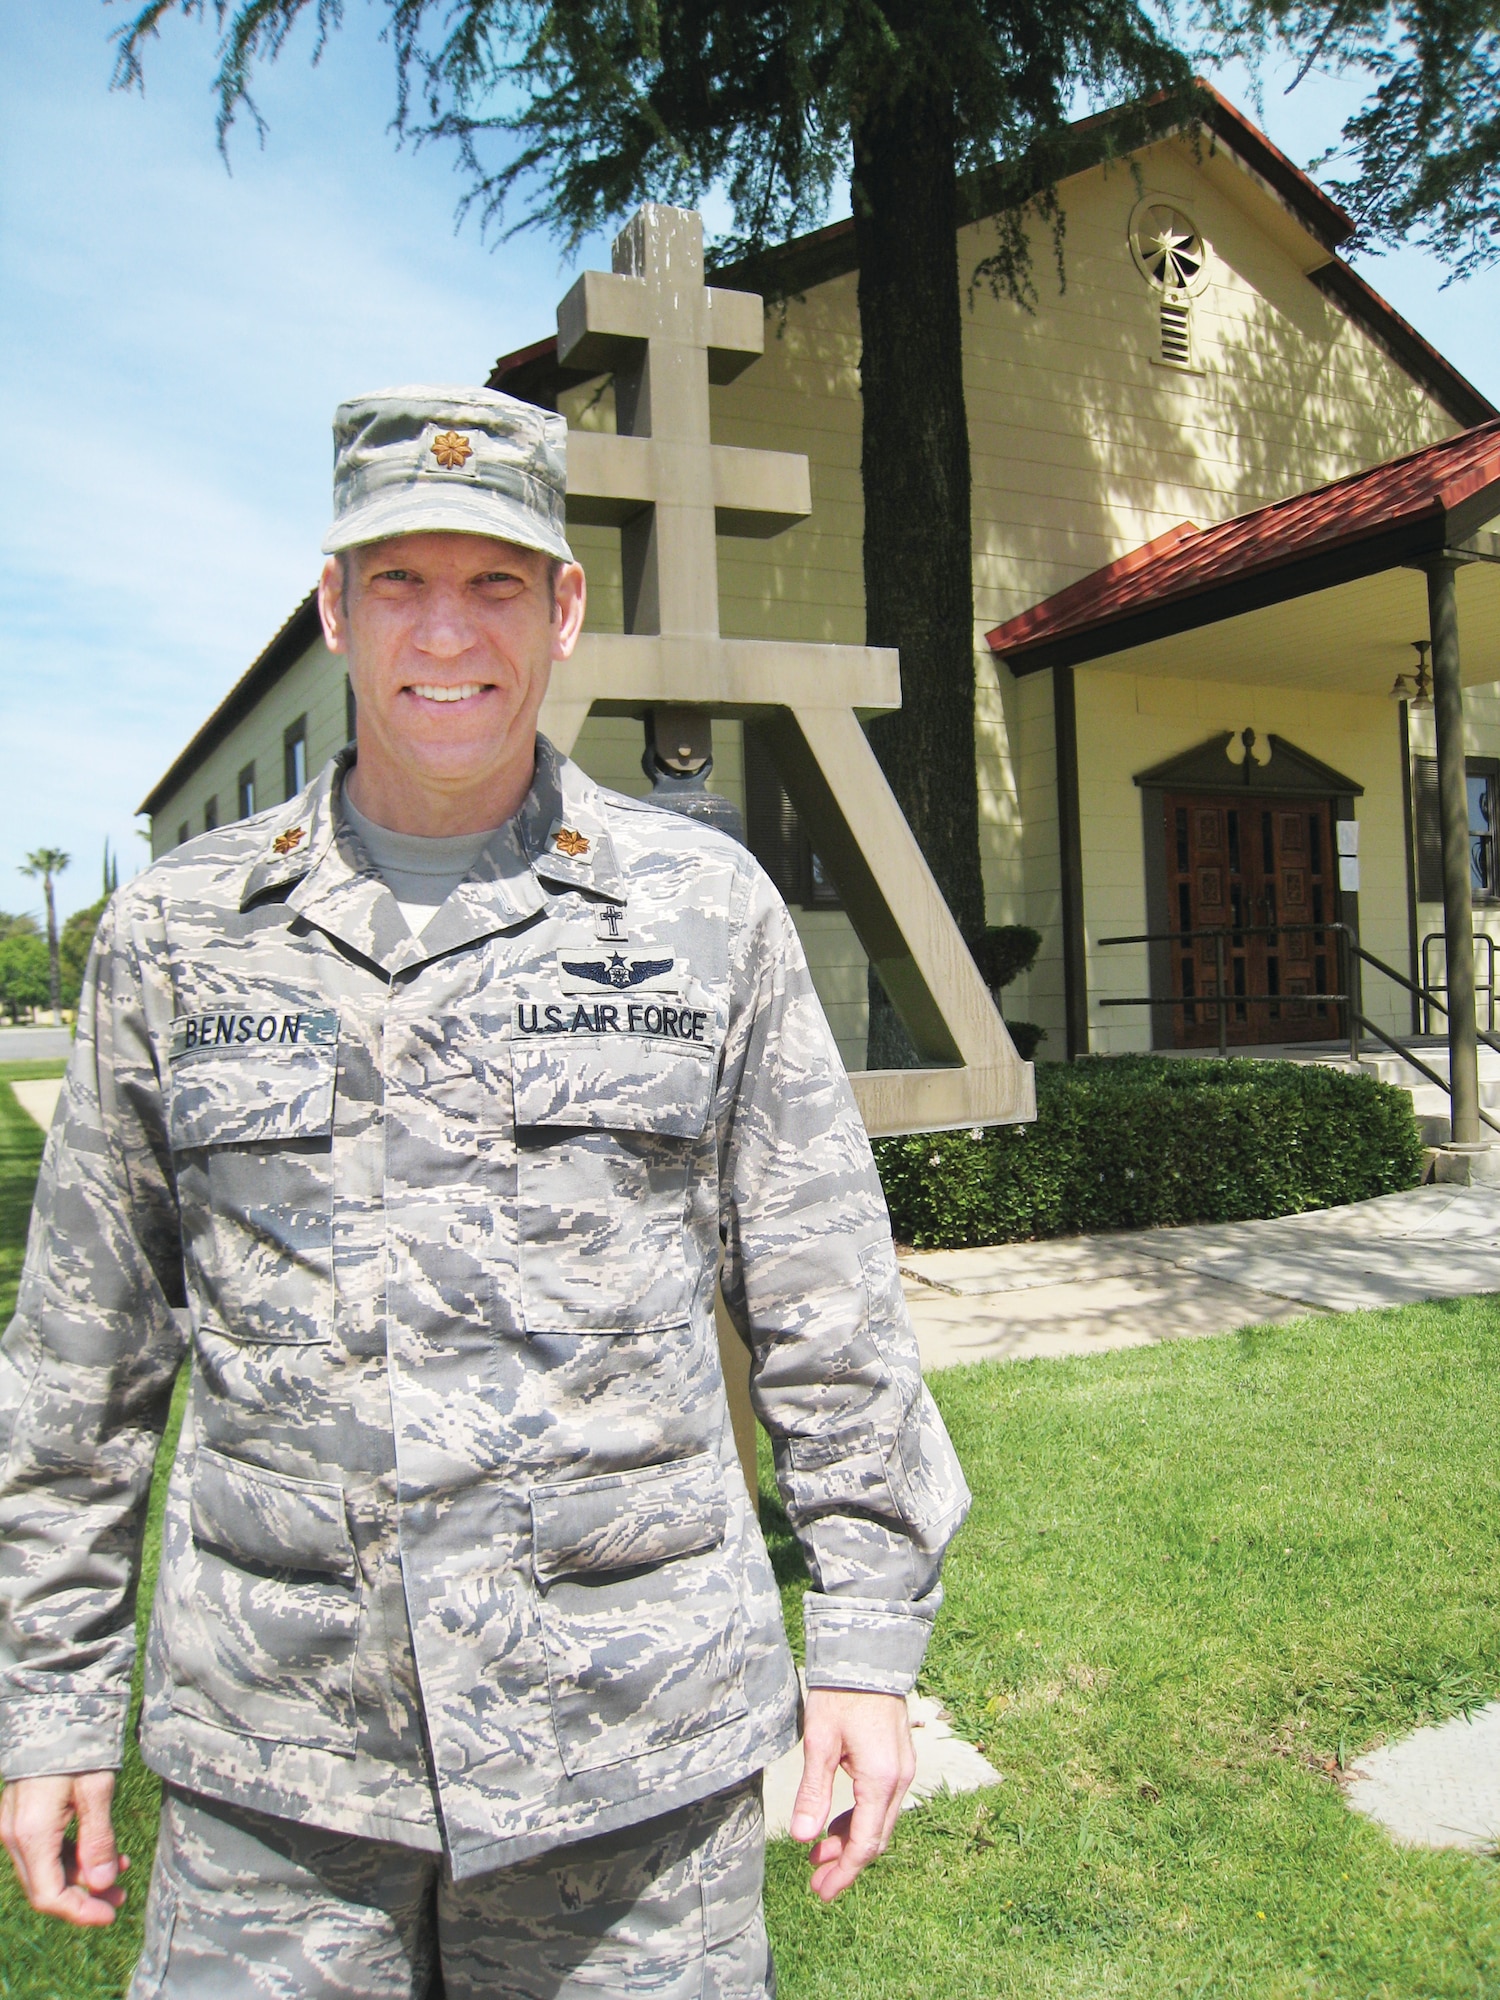 Chaplain (Maj.) Craig Benson stands in front of the base chapel at March Air Reserve Base, April 2.  Chaplain Benson arrived at March ARB last month and is the first of six new Active Guard Reserve chaplains assigned to the most active bases across the United States. (U.S. Air Force Photo/2nd Lt. Zach Anderson)